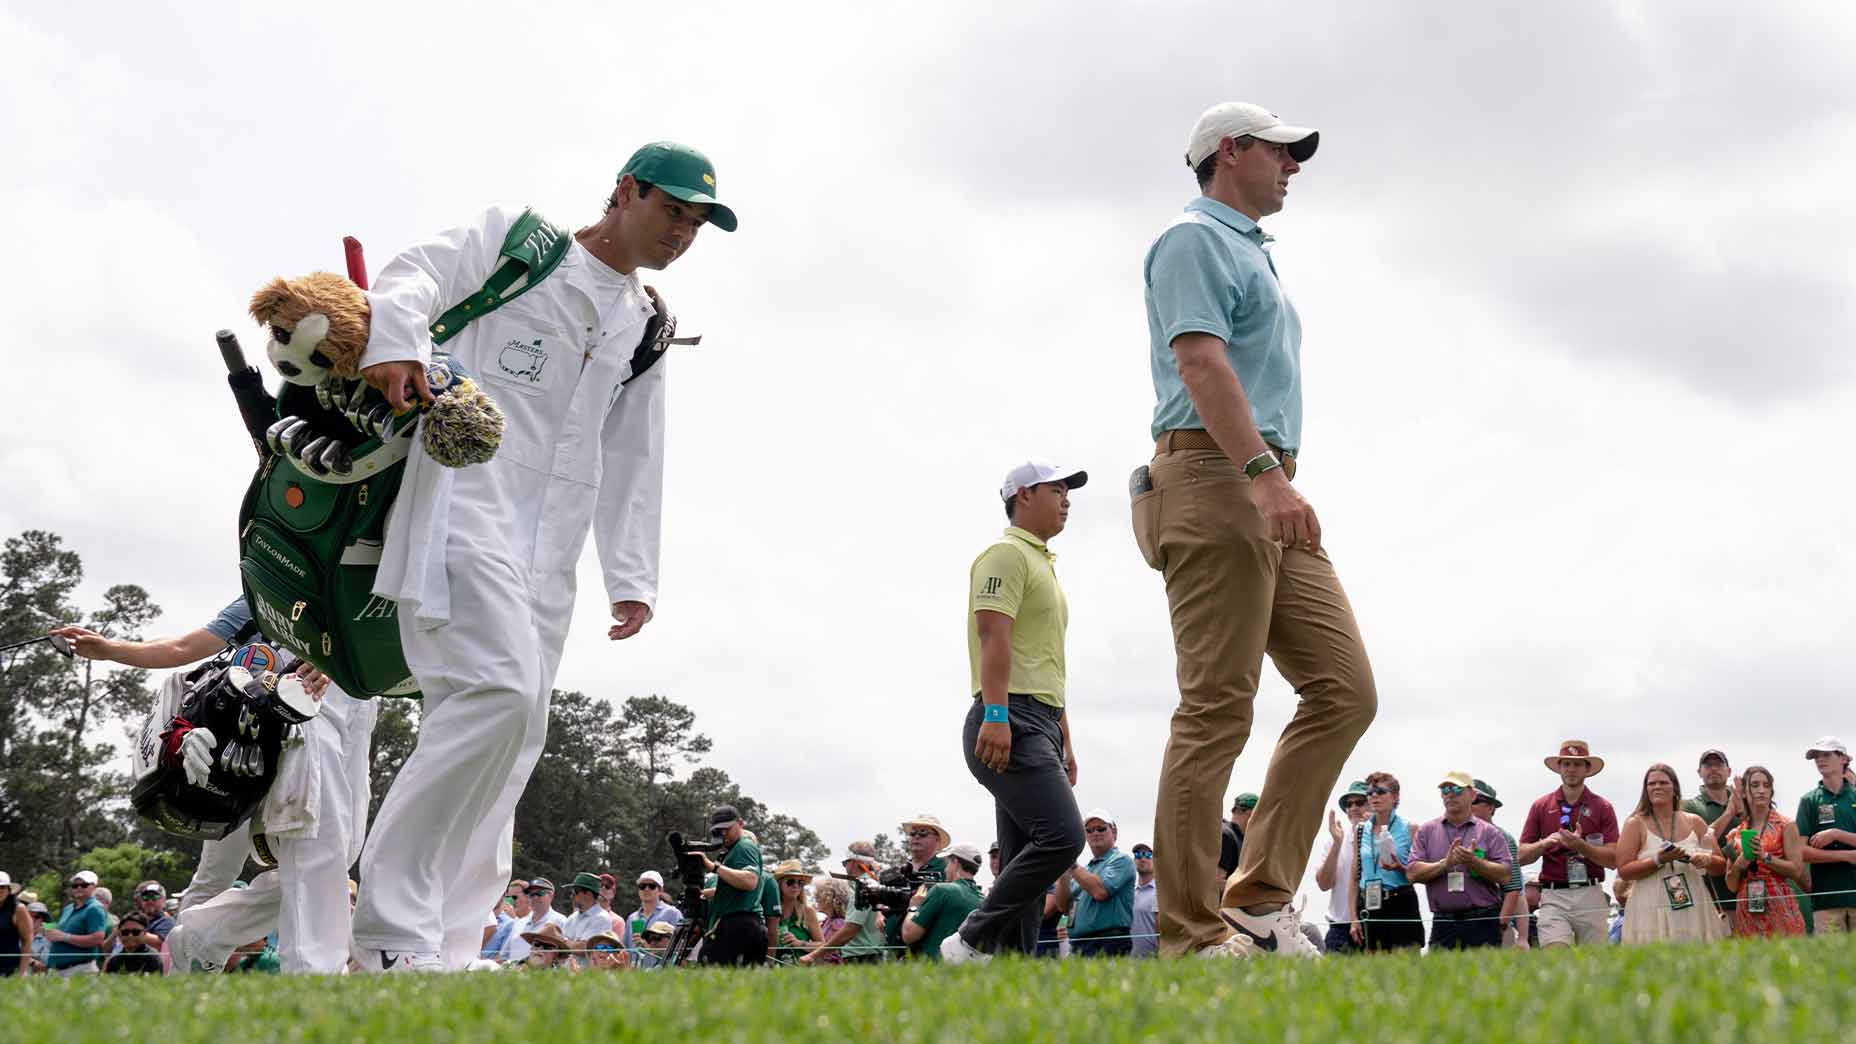 Rory McIlroy makes history at 2023 Masters with live interview